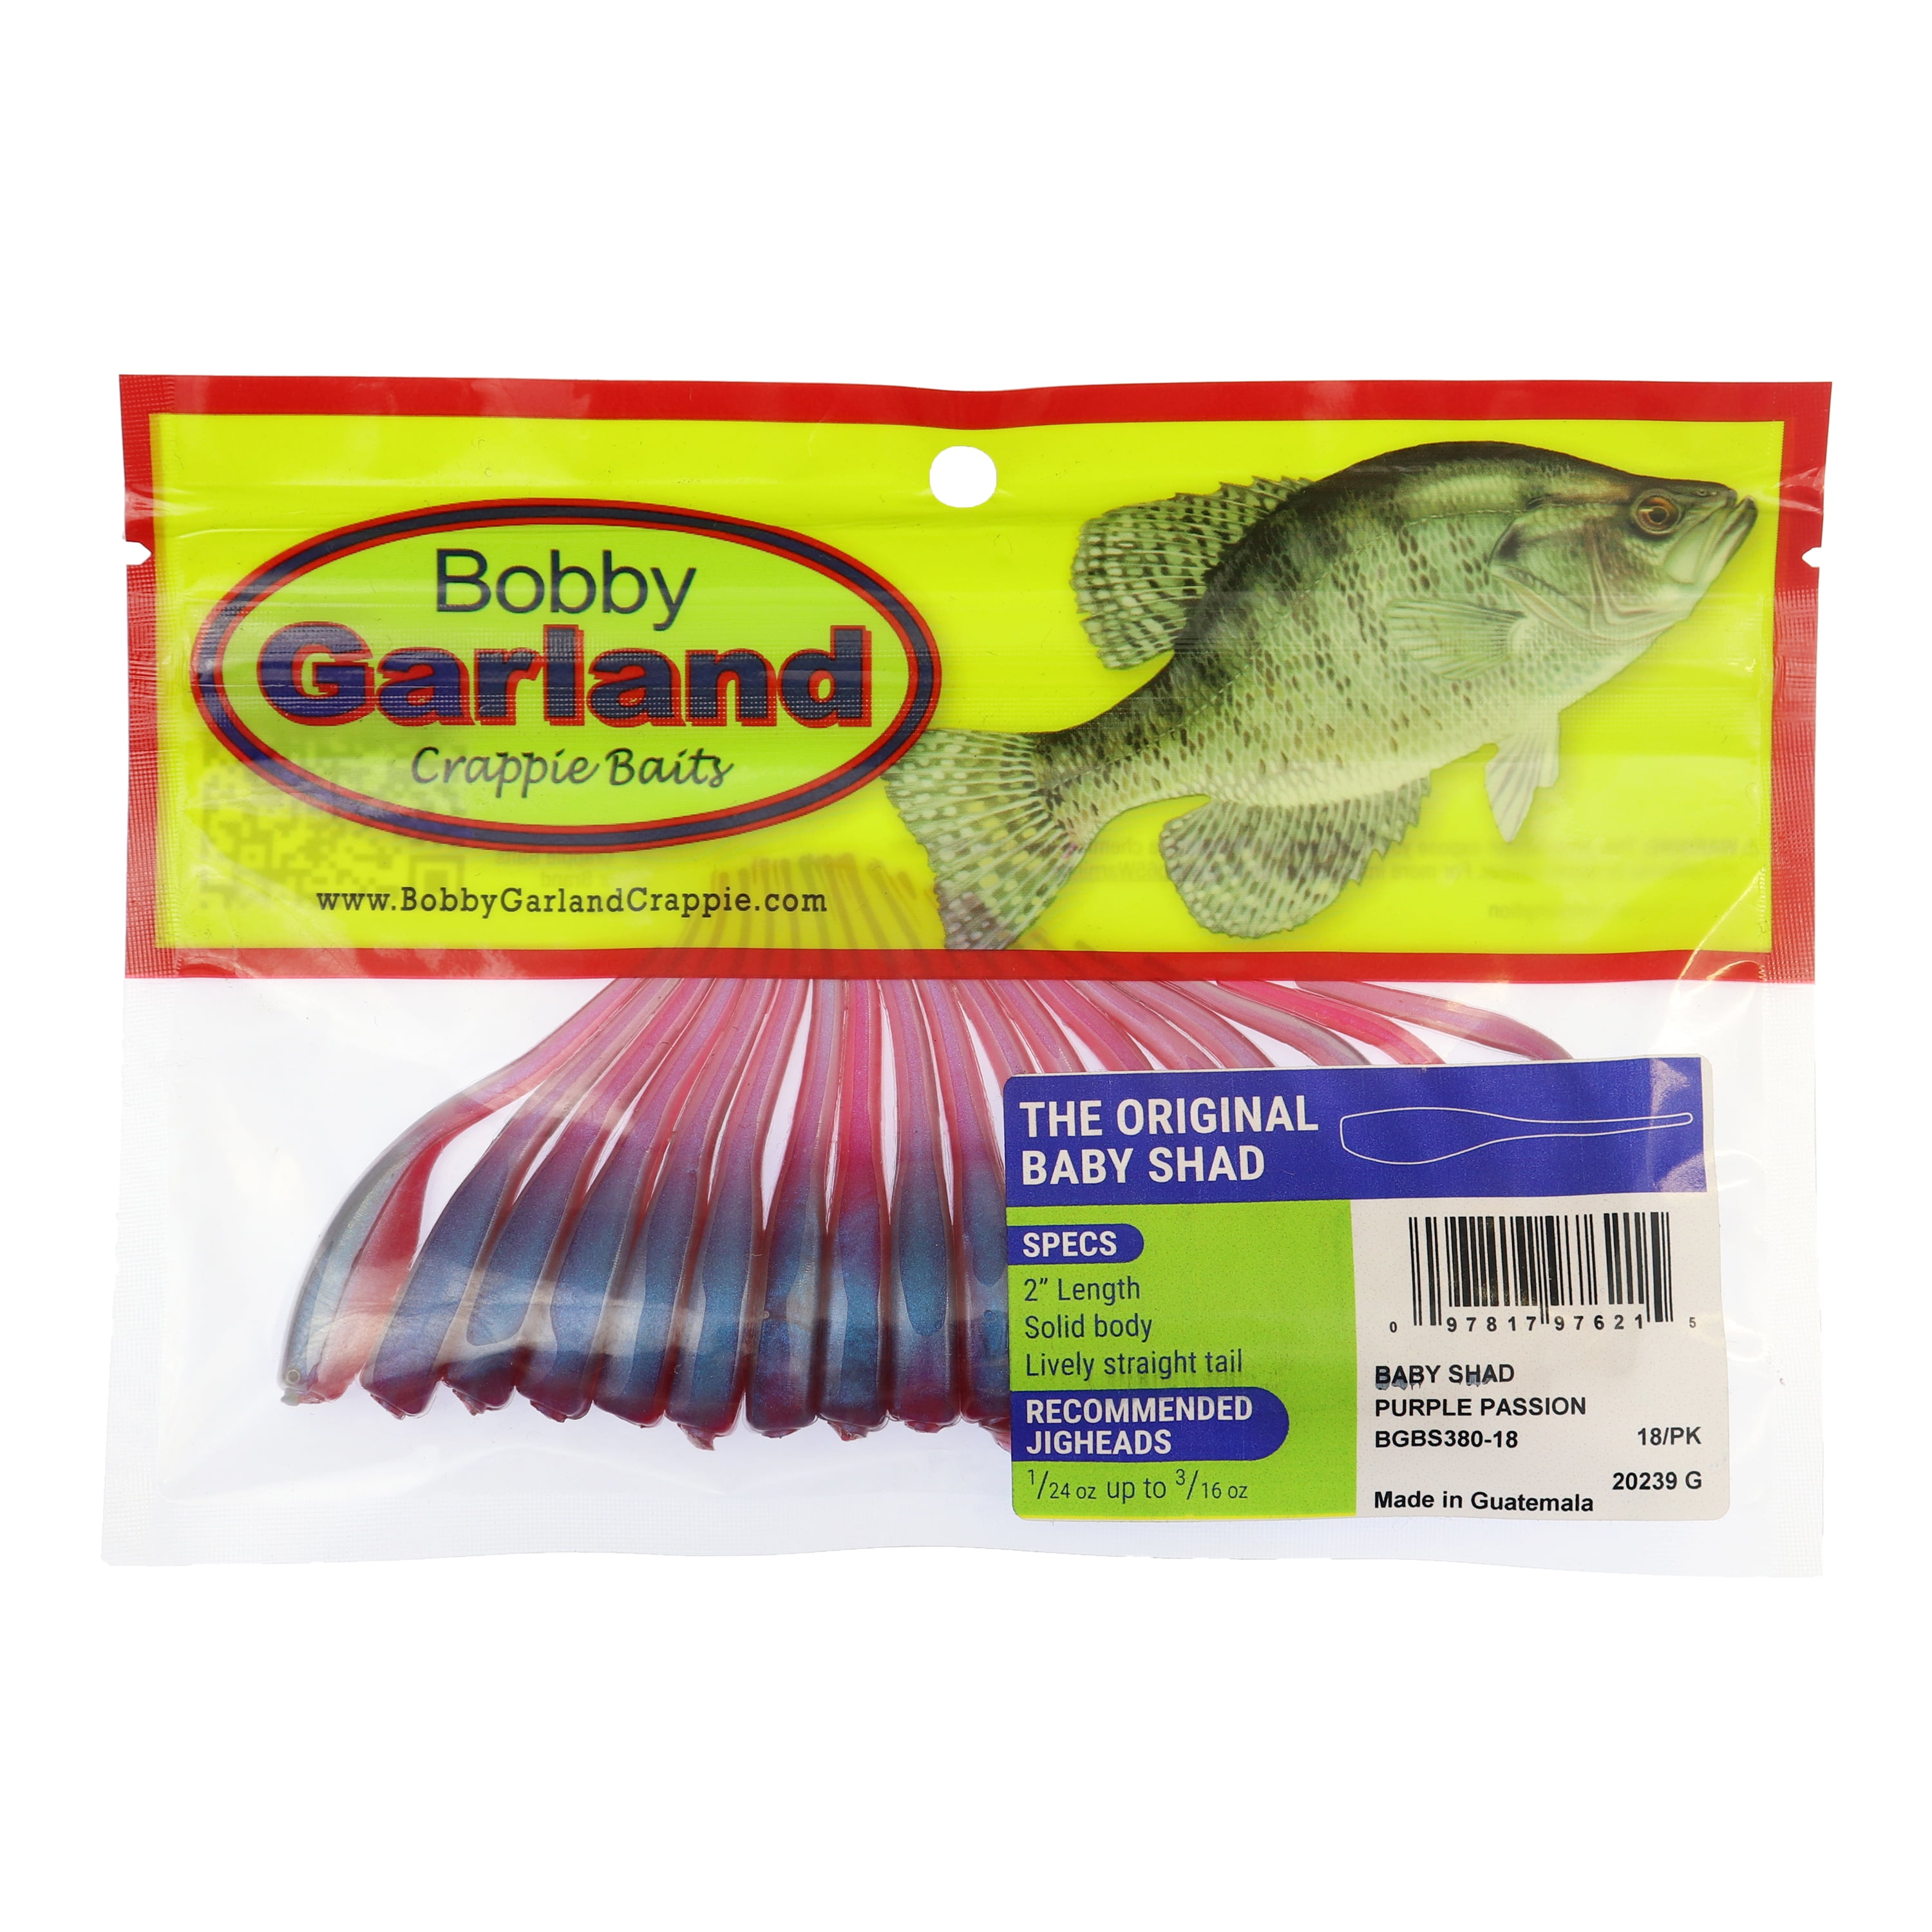 Bobby Garland Baby Shad Crappie Bait 2 Lights Out 18 Count 